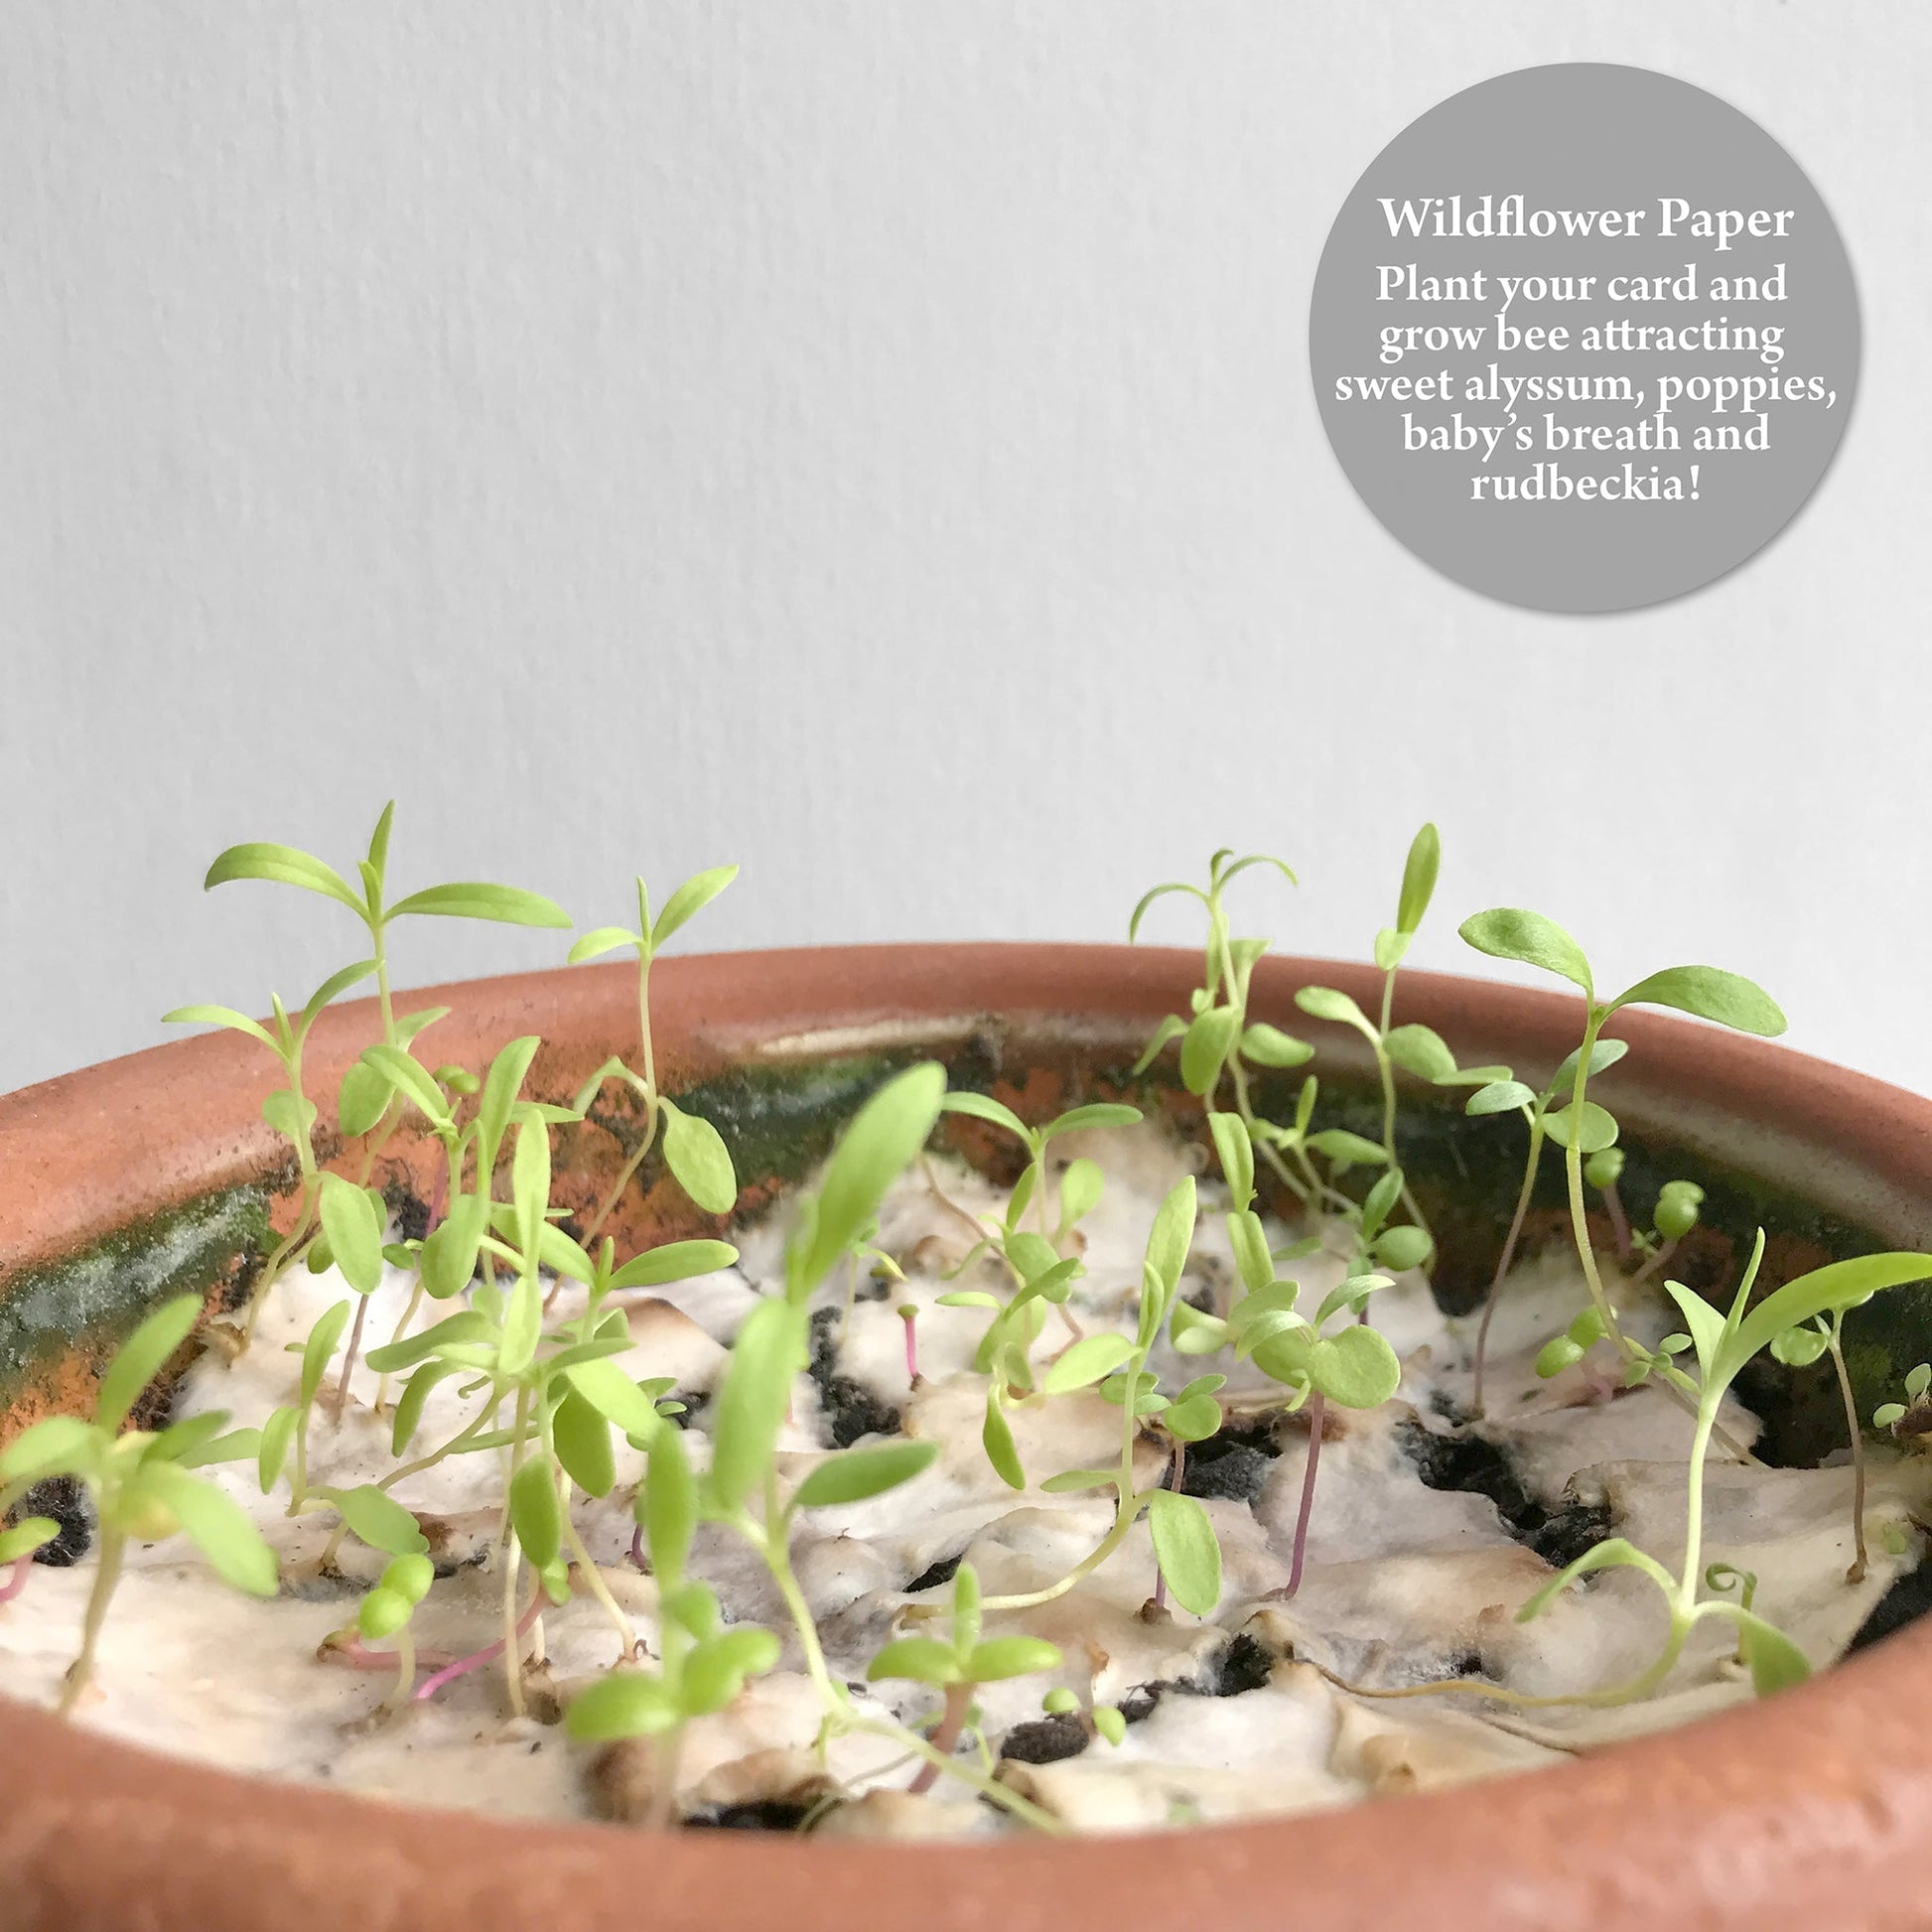 Image shows a wildflower seed card growing inside a pot. The paper contains a mix of sweet alyssum, poppy, baby's breath and rudbeckia seeds so when your recipient has finished with their card they can plant it and grow bee friendly flowers.